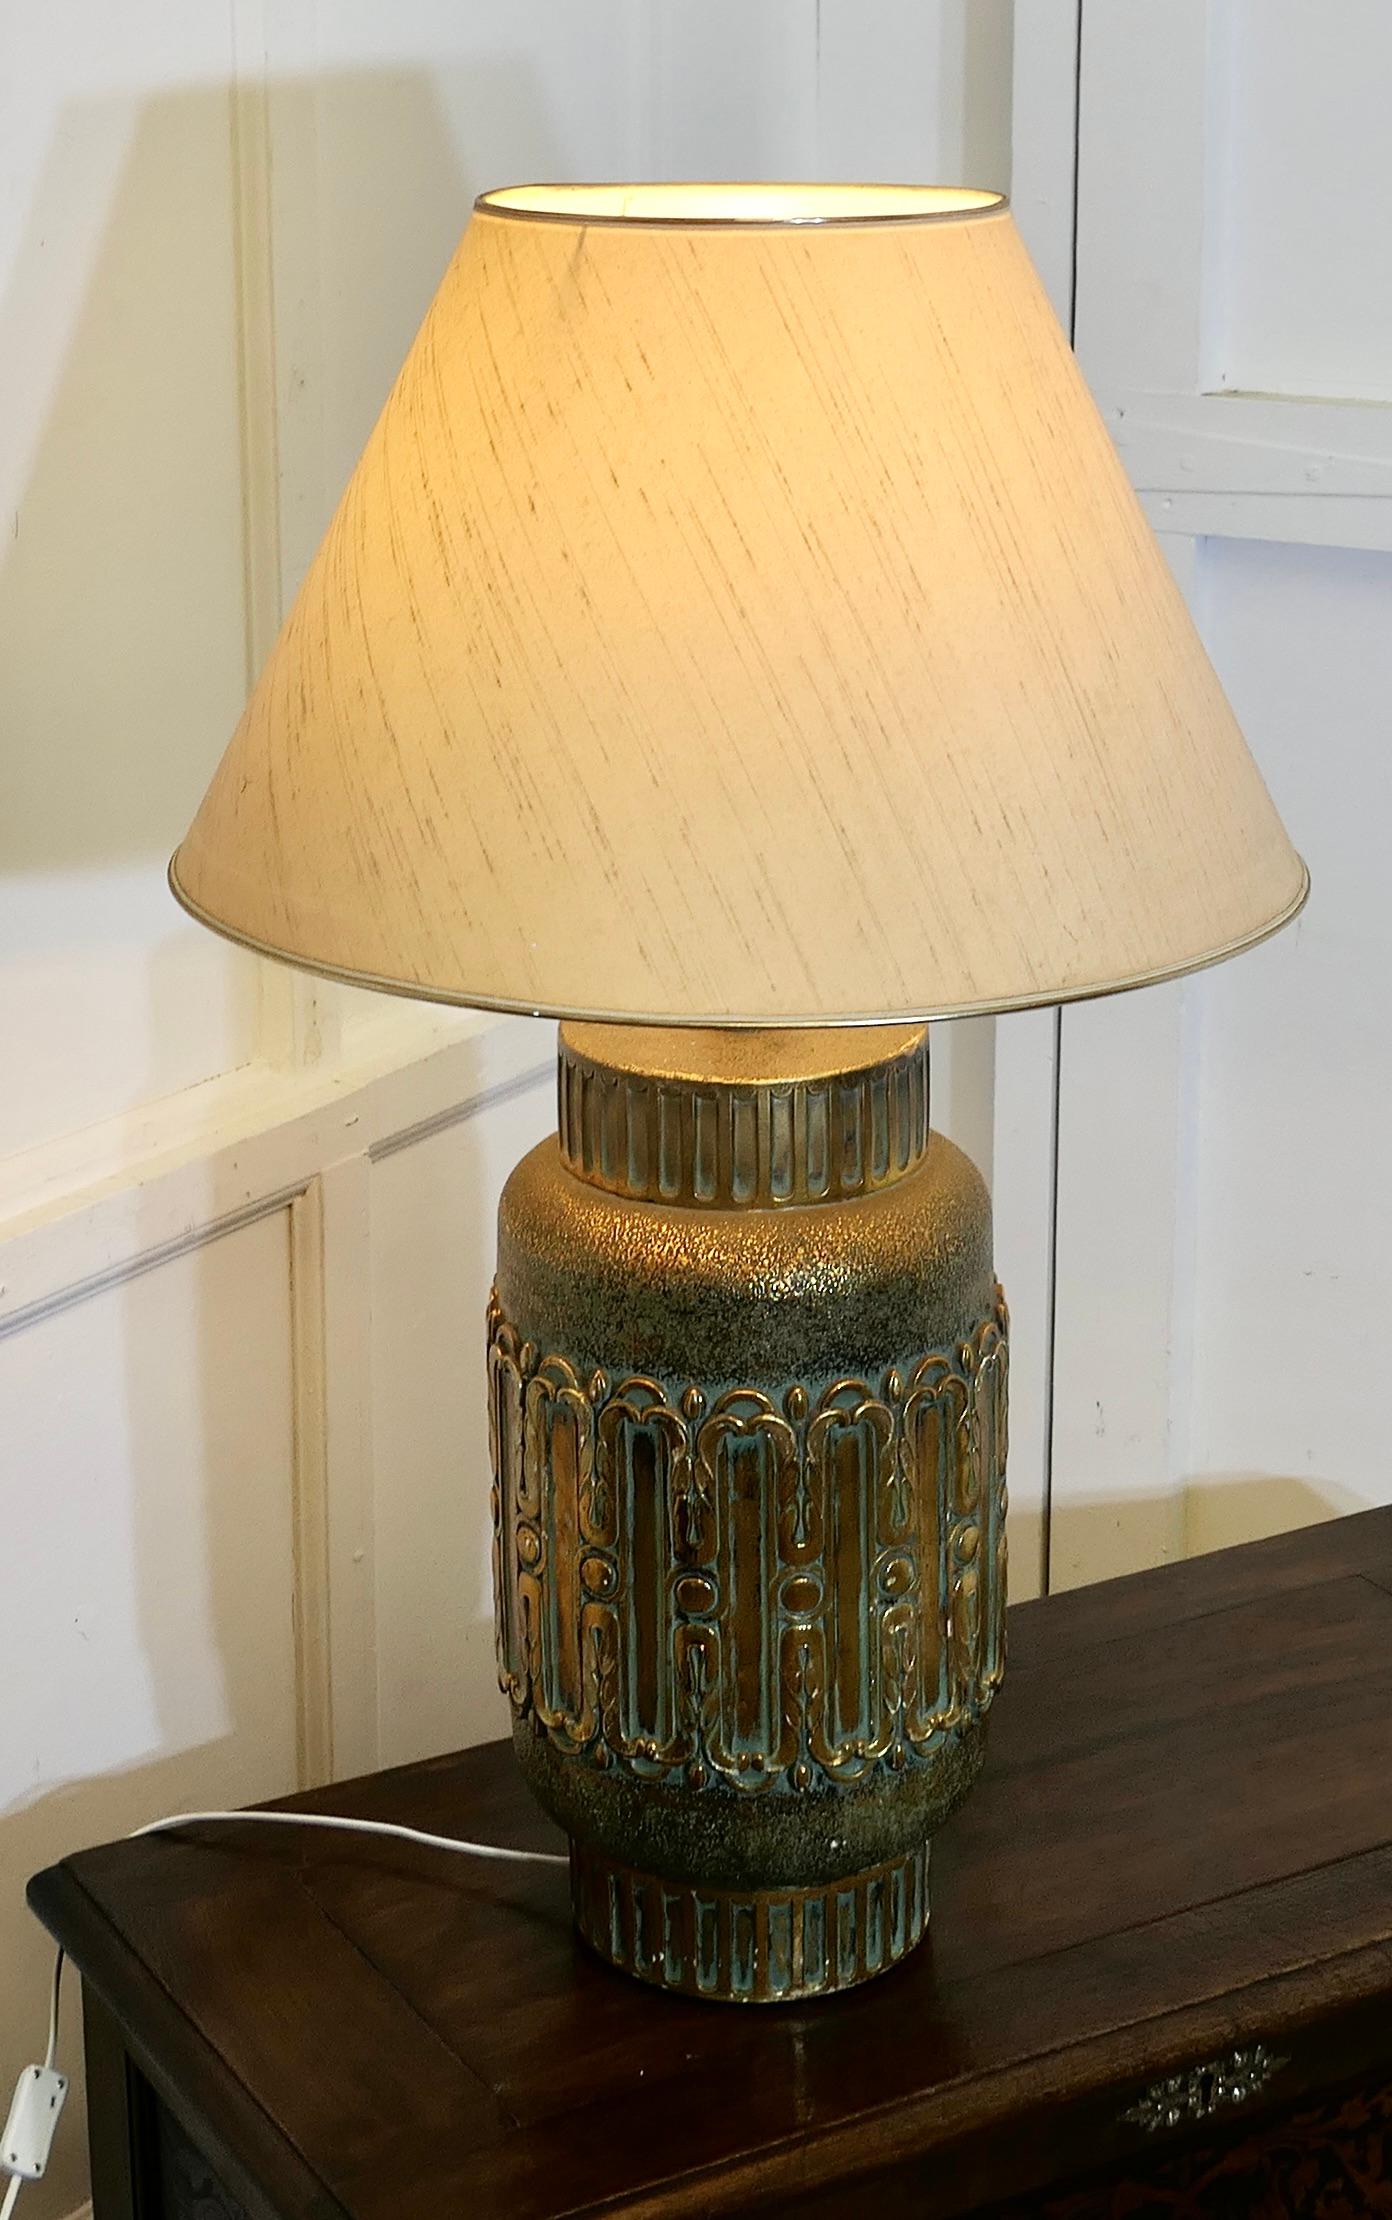 Mid-20th Century Large Bulbous Simulated Brass Ceramic Vase Lamp    For Sale